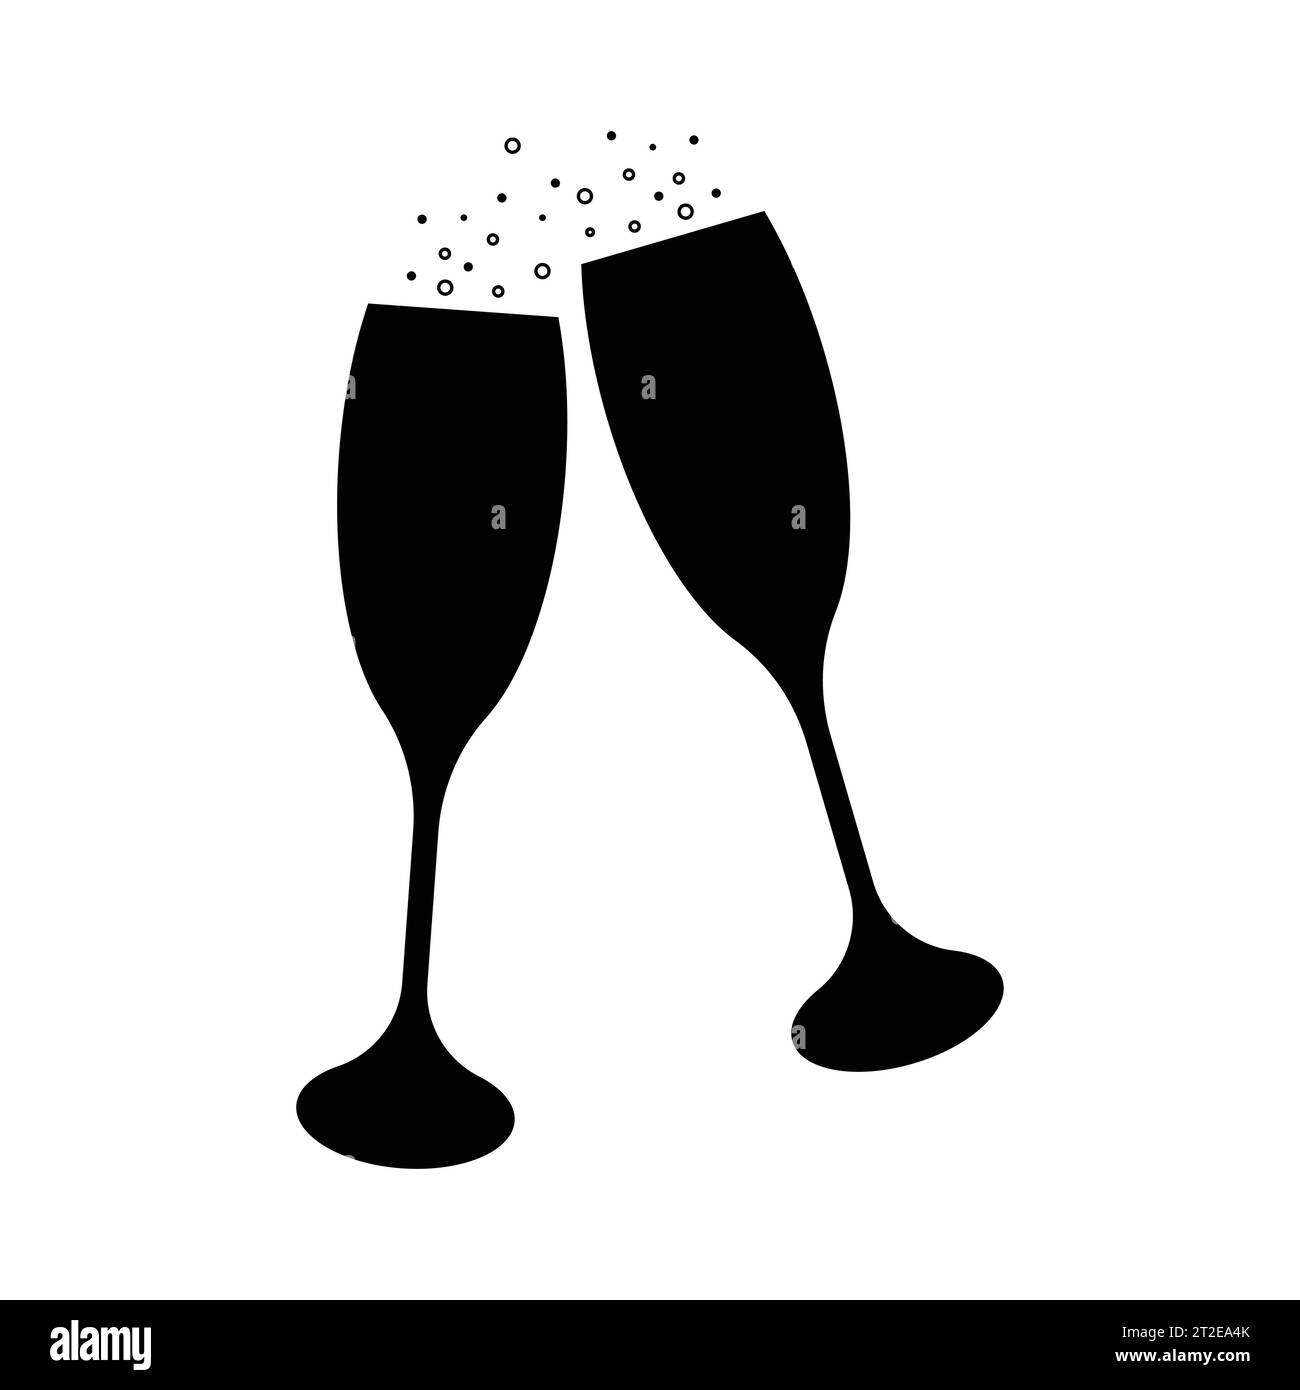 Two Glasses of Champagne Silhouette.Champagne glass icon. Party drink silhouette.Vector illustration. Stock Vector